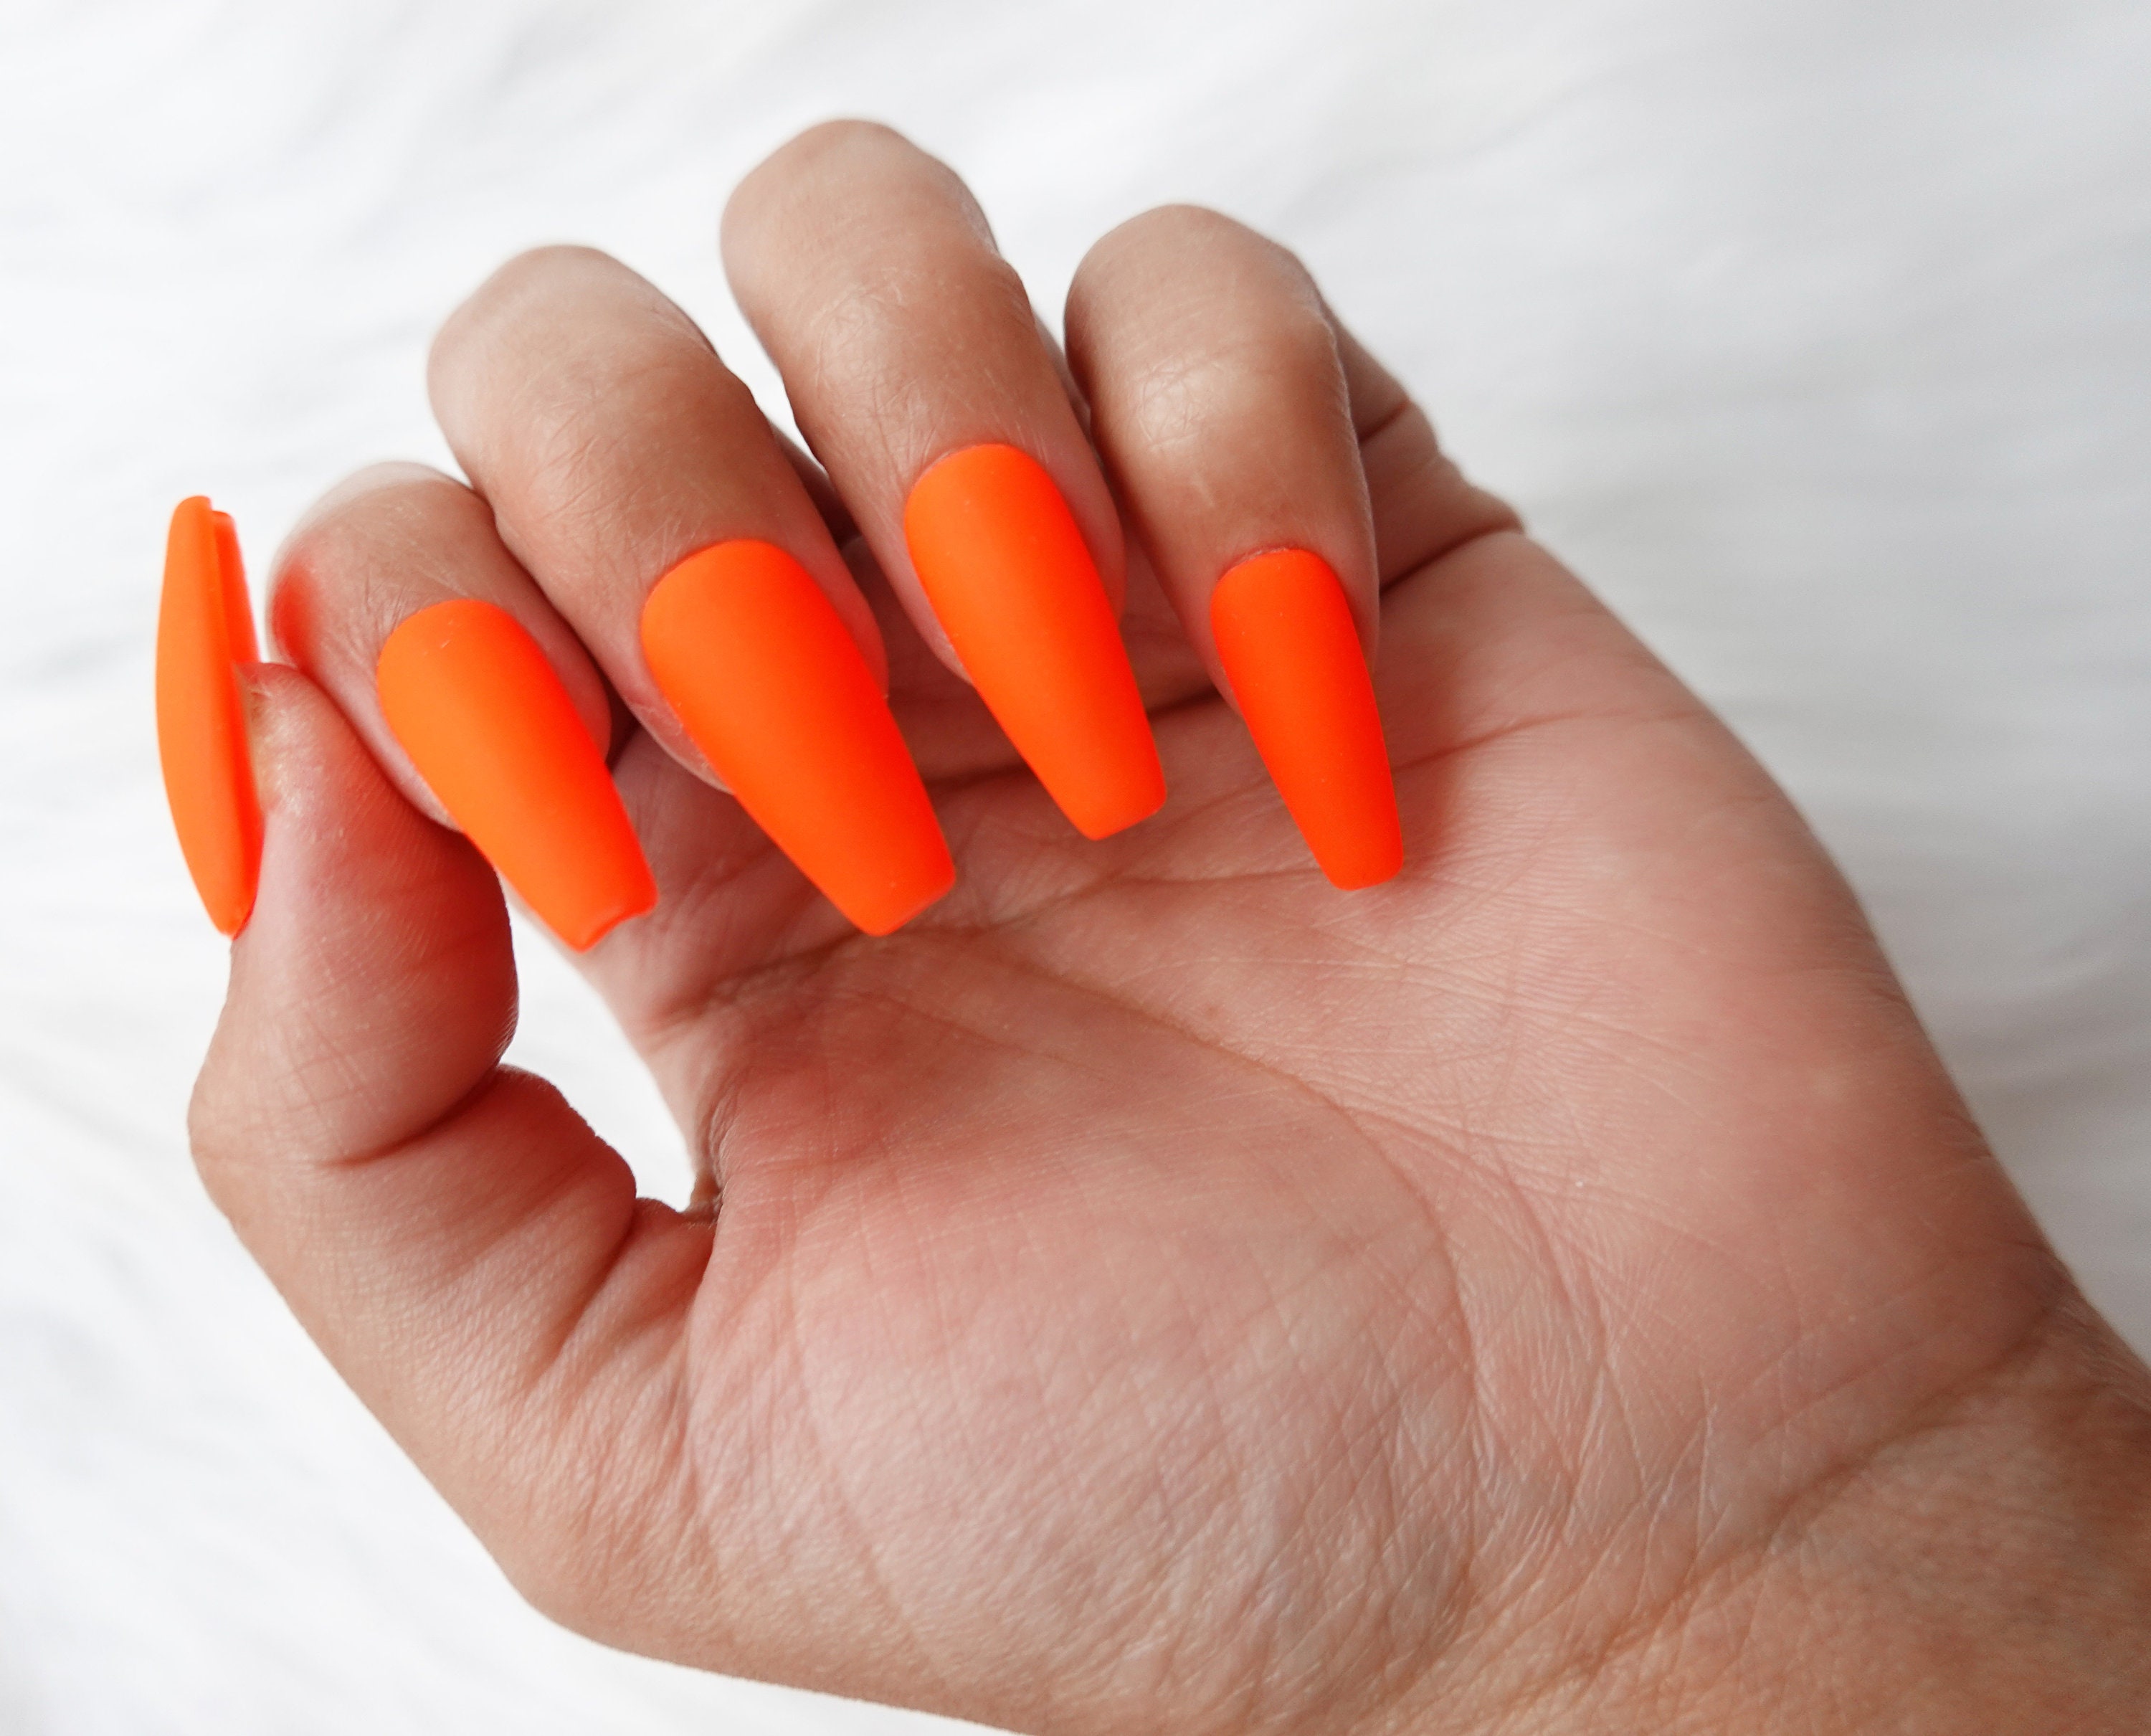 Pin by Alexis on Nails | Orange acrylic nails, Neon orange nails, Almond acrylic  nails